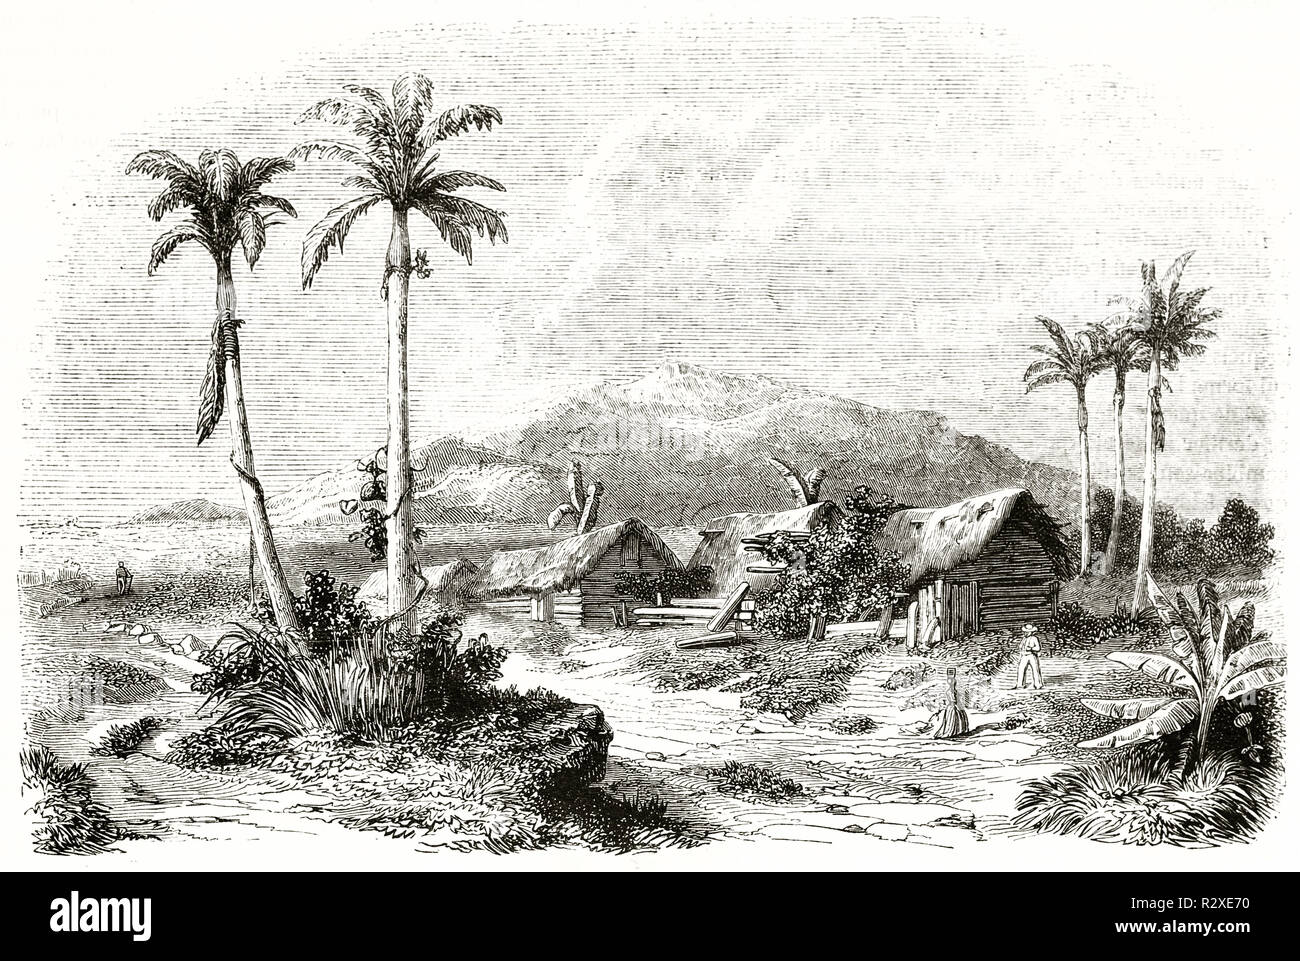 Old view of Guadeloupe, Caribbean. By Fontenay, publ. on Magasin Pittoresque, Paris, 1846 Stock Photo